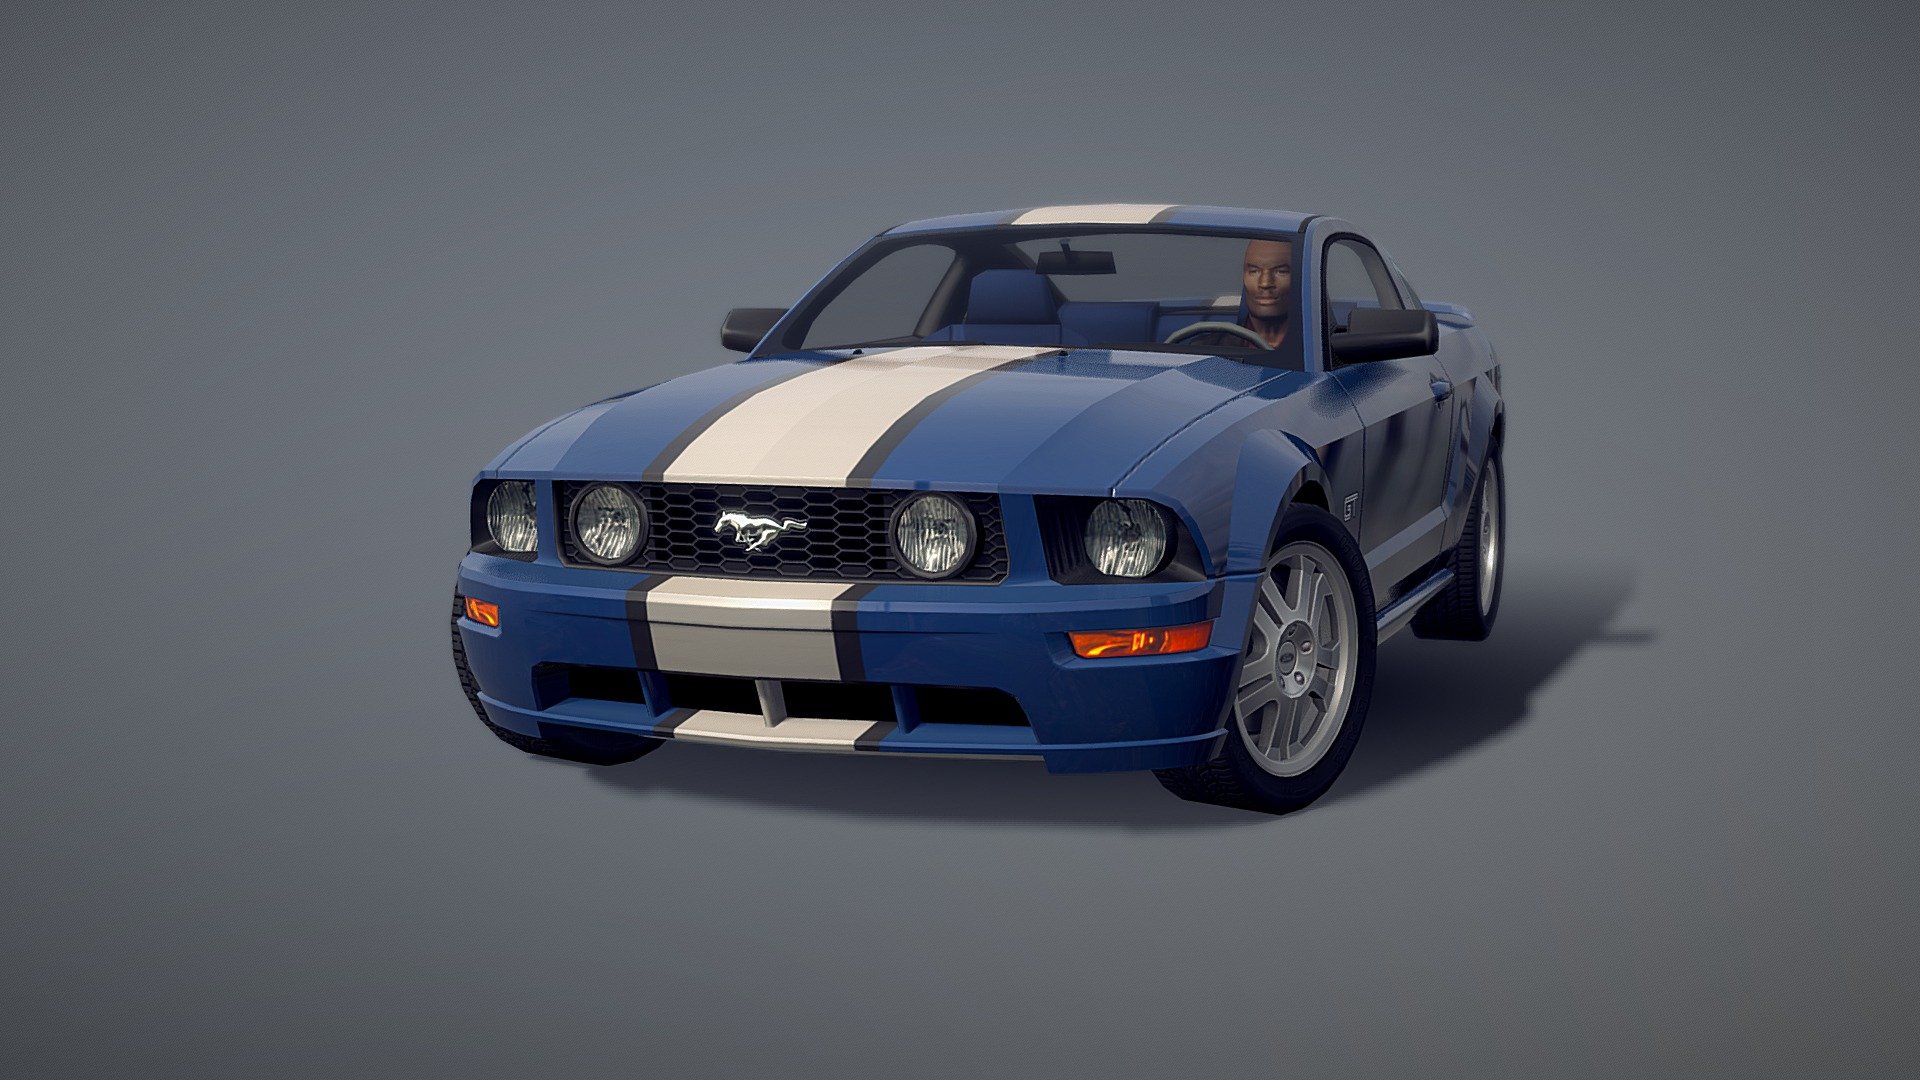 Low poly model of the return of the retro styled Ford Mustang from 2005.  

Photoshop PSD files included as well as the 2005 color run options.  There are 5 interior trim colors as well, blue (as shown), brown, red, grey, and black.

A Maya 2020 file is also included with the FBX format.

Thanks for checking out my model.  Cheers! - 2005 Ford Mustang GT - Buy Royalty Free 3D model by stecki 3d model